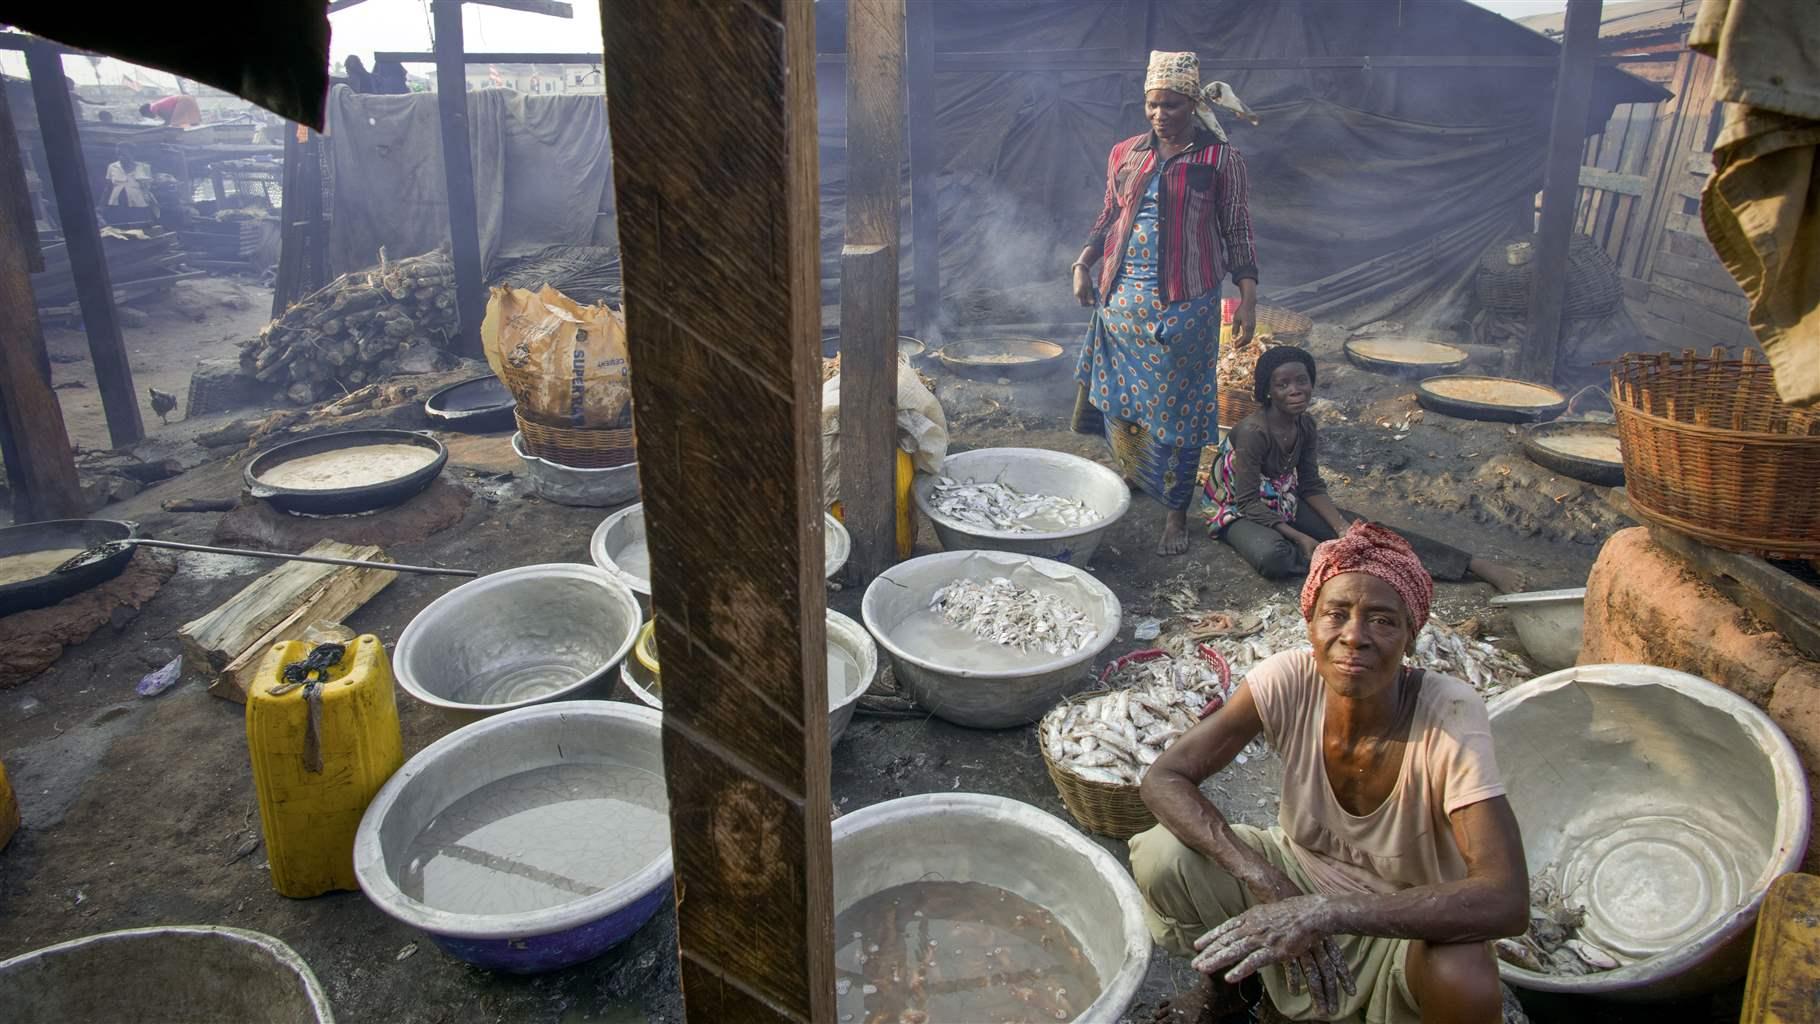 Three Black women—two seated and one standing—are in an open-air, dirt-floor area surrounded by metal tin basins, most empty but some with small dead fish in them. The air is smoky and the beams and frame of a roofless structure are visible around and above the women.